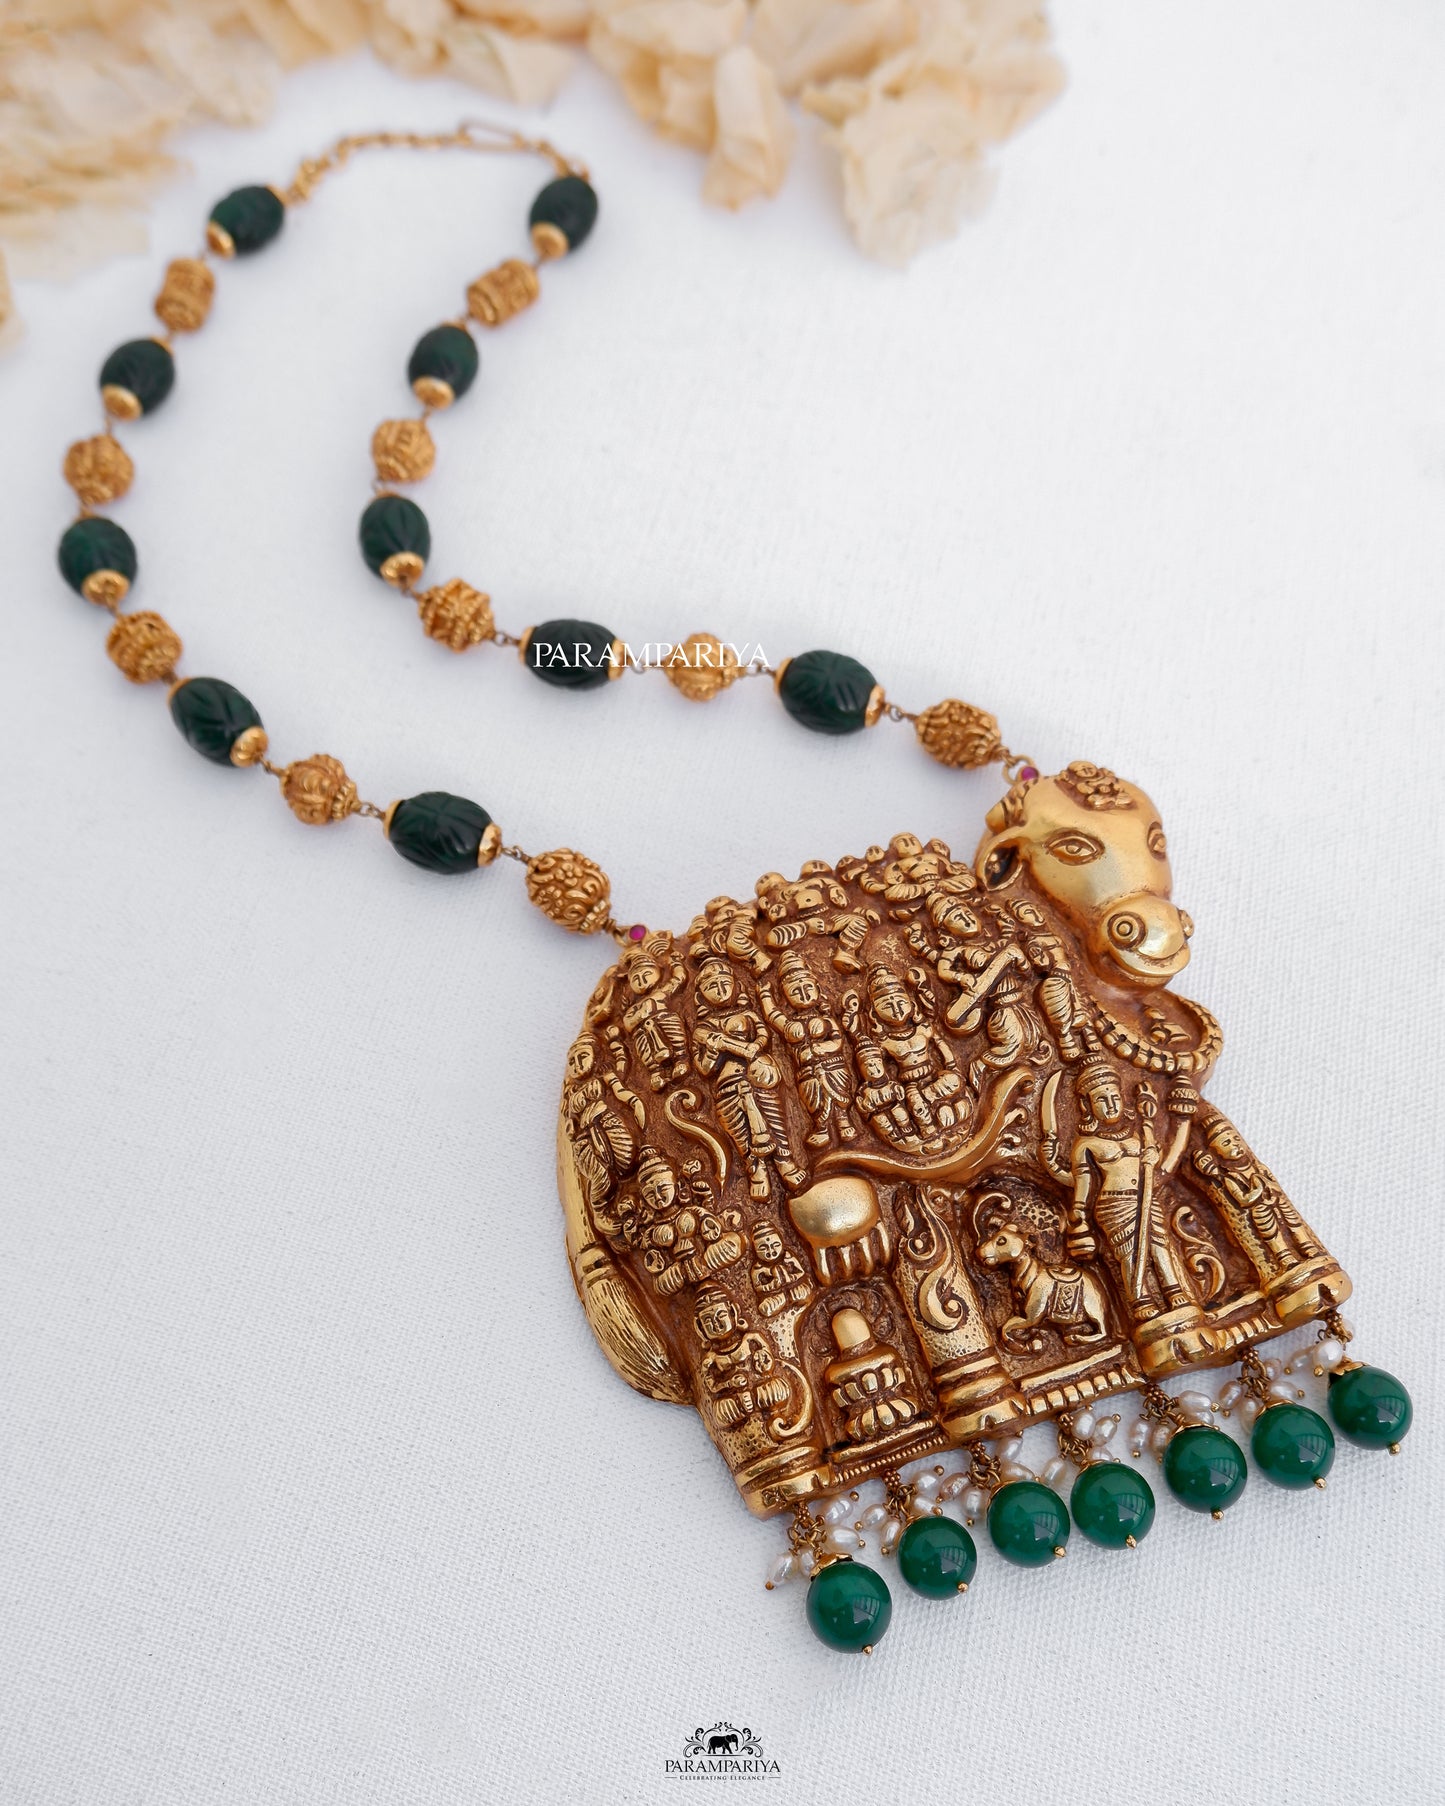 
Expertly handcrafted with pure silver and adorned with micron gold plating and semi-precious beads, this temple necklace showcases a stunning representation of Kamadhenu, creating a truly exquisite work of art.